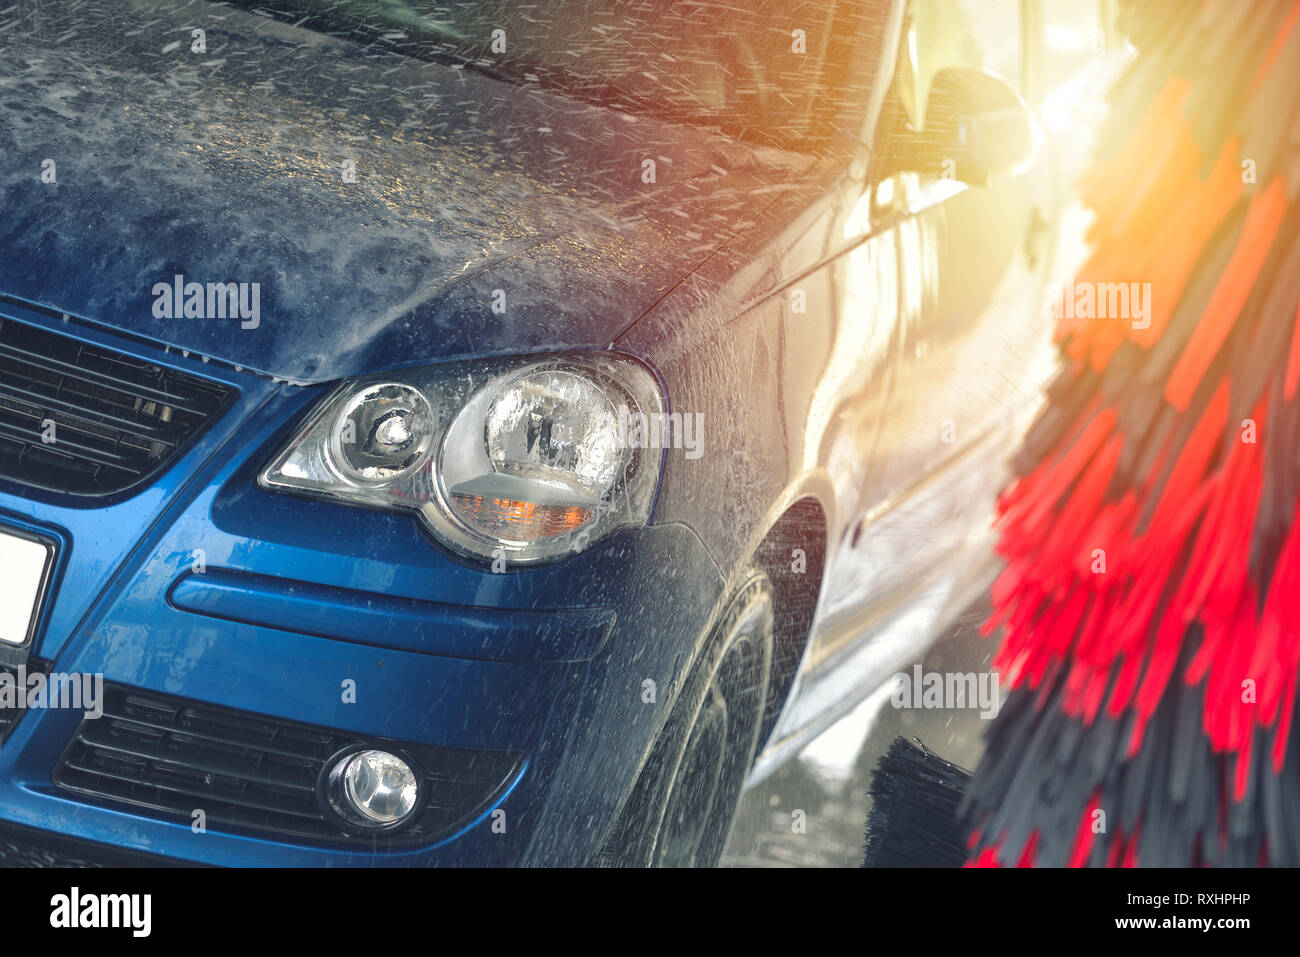 Red compact SUV car with sport and modern design washing with soap. Car  covered with white foam. Car care service business concept. Car wash with  foam Stock Photo - Alamy